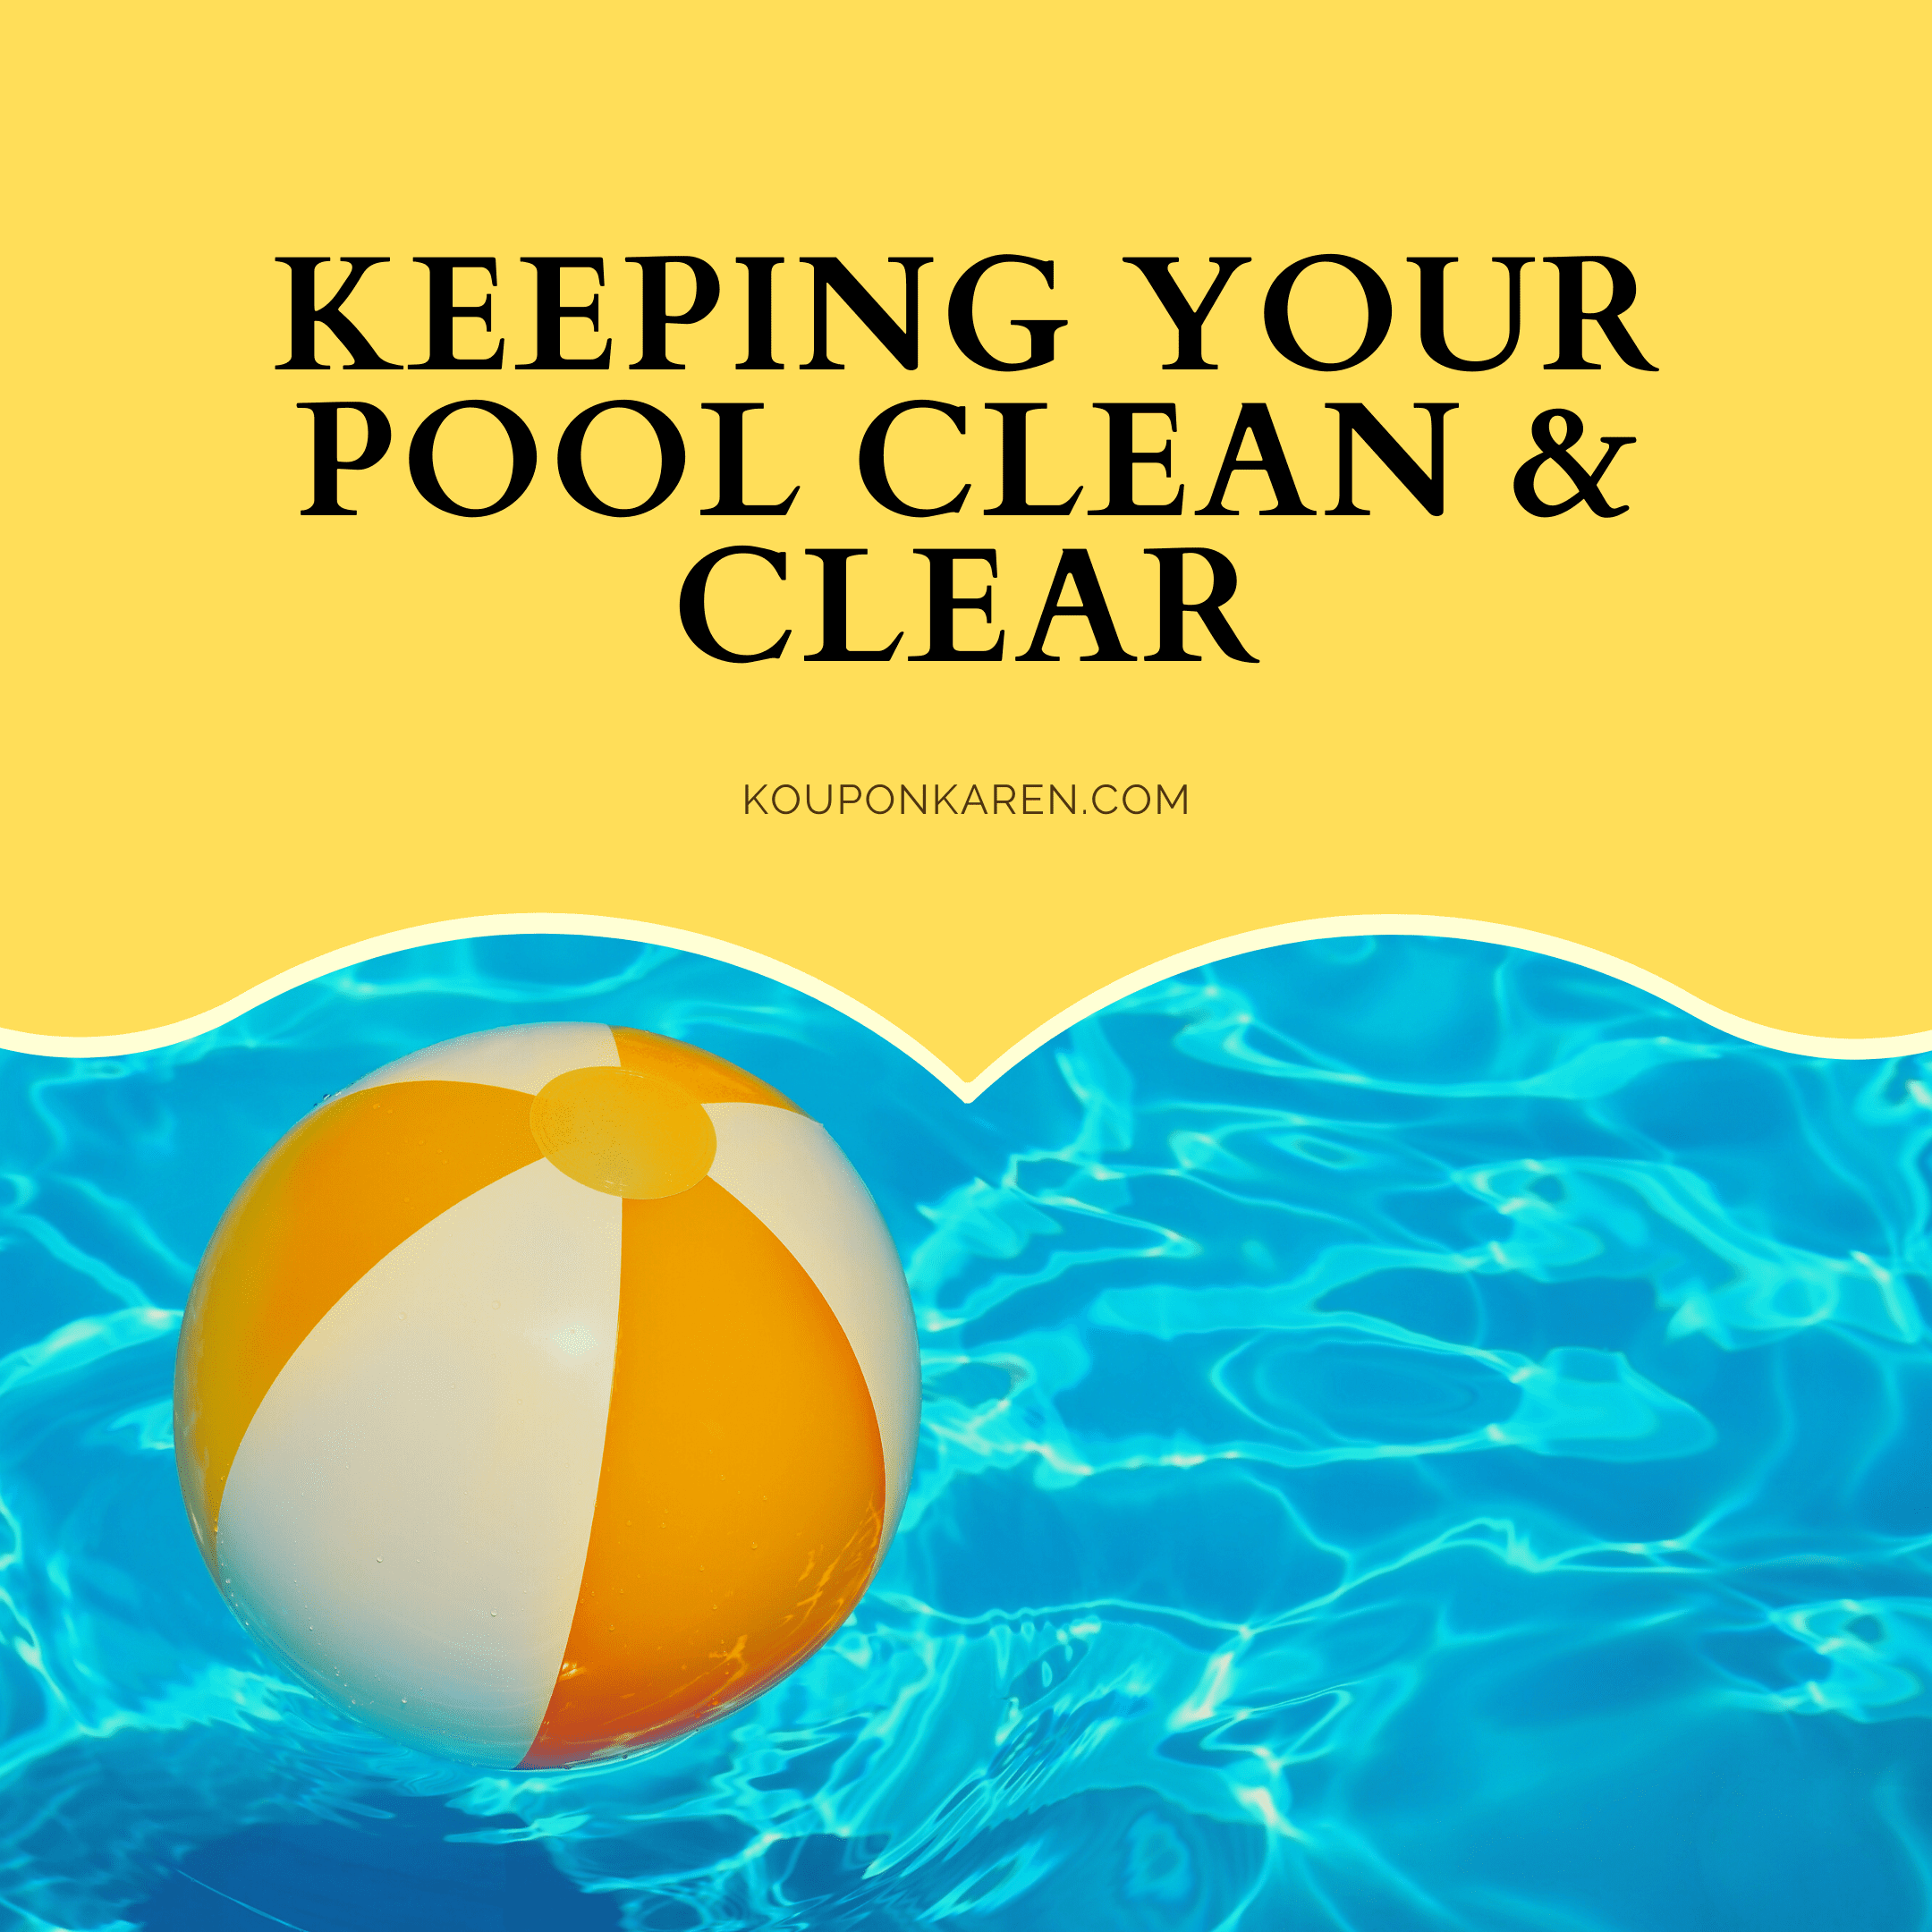 Tips for Keeping Your Pool Clean and Clear